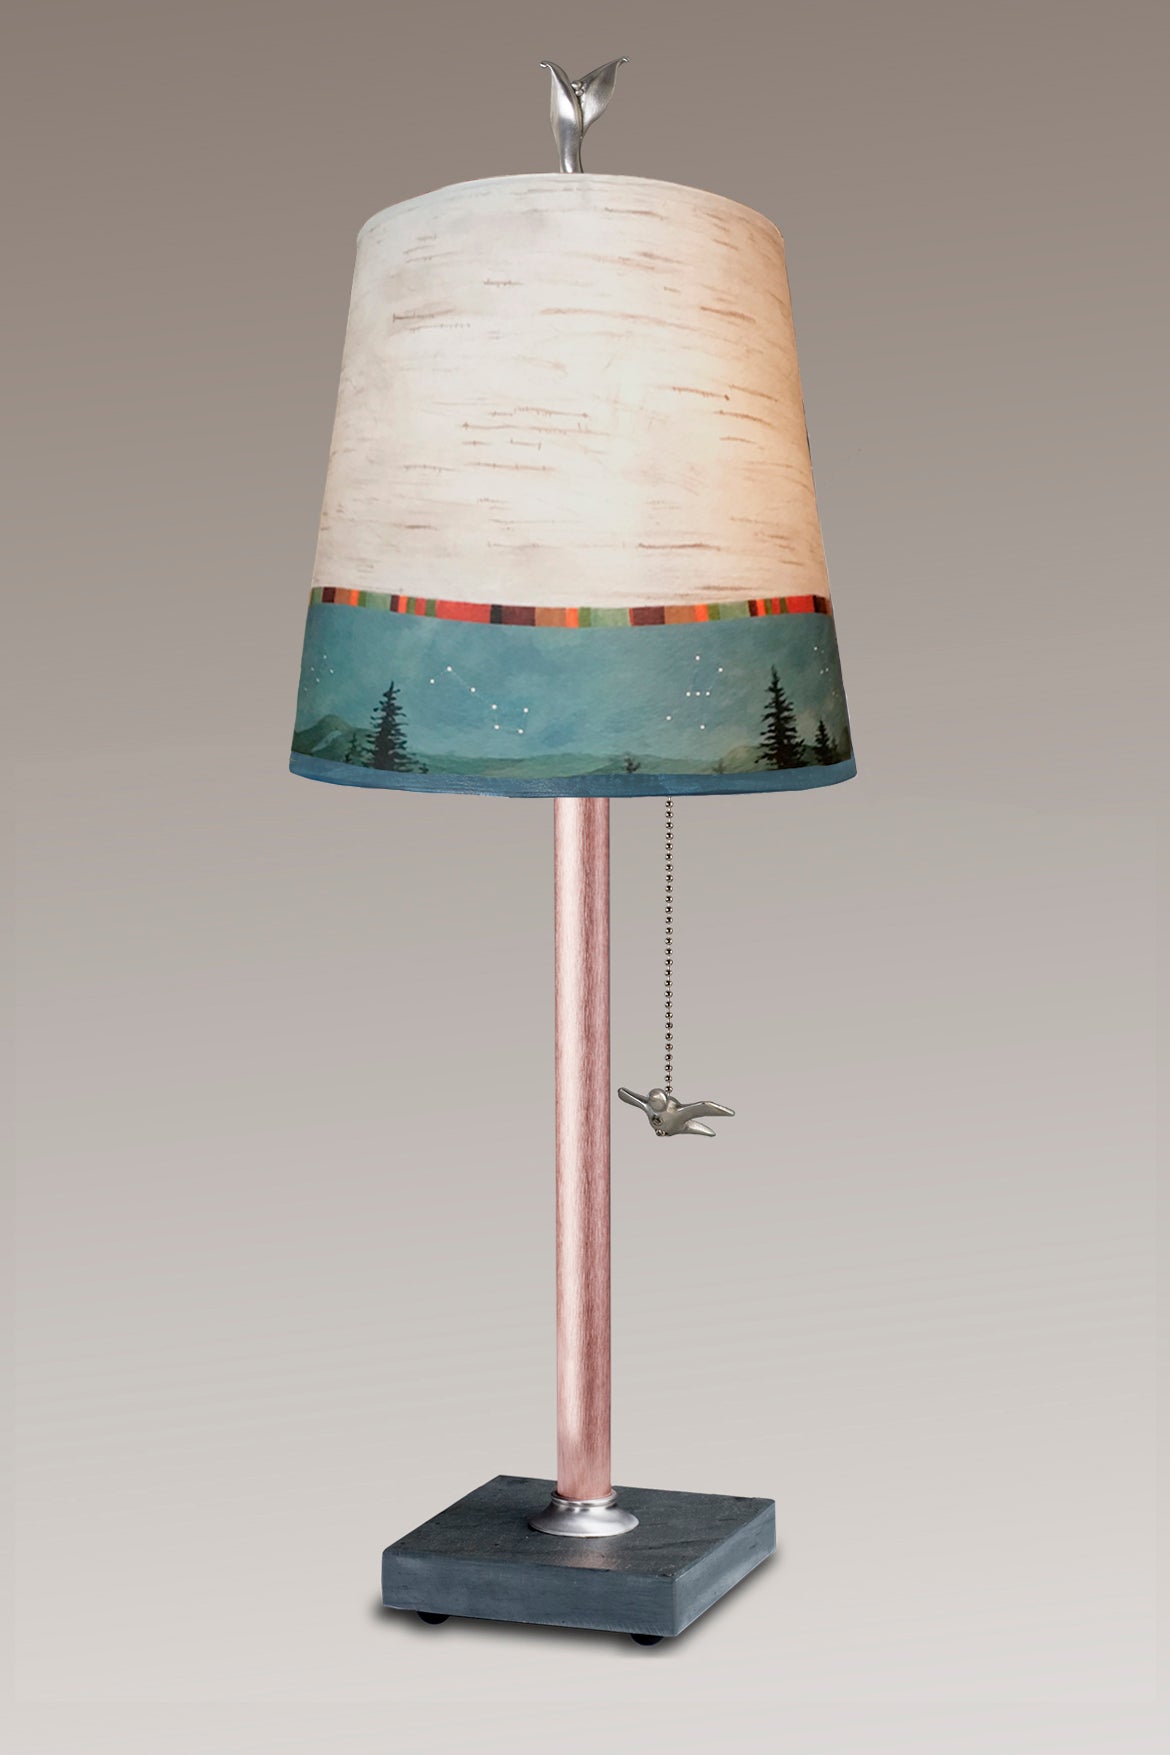 Janna Ugone &amp; Co Table Lamps Copper Table Lamp with Small Drum Shade in Birch Midnight